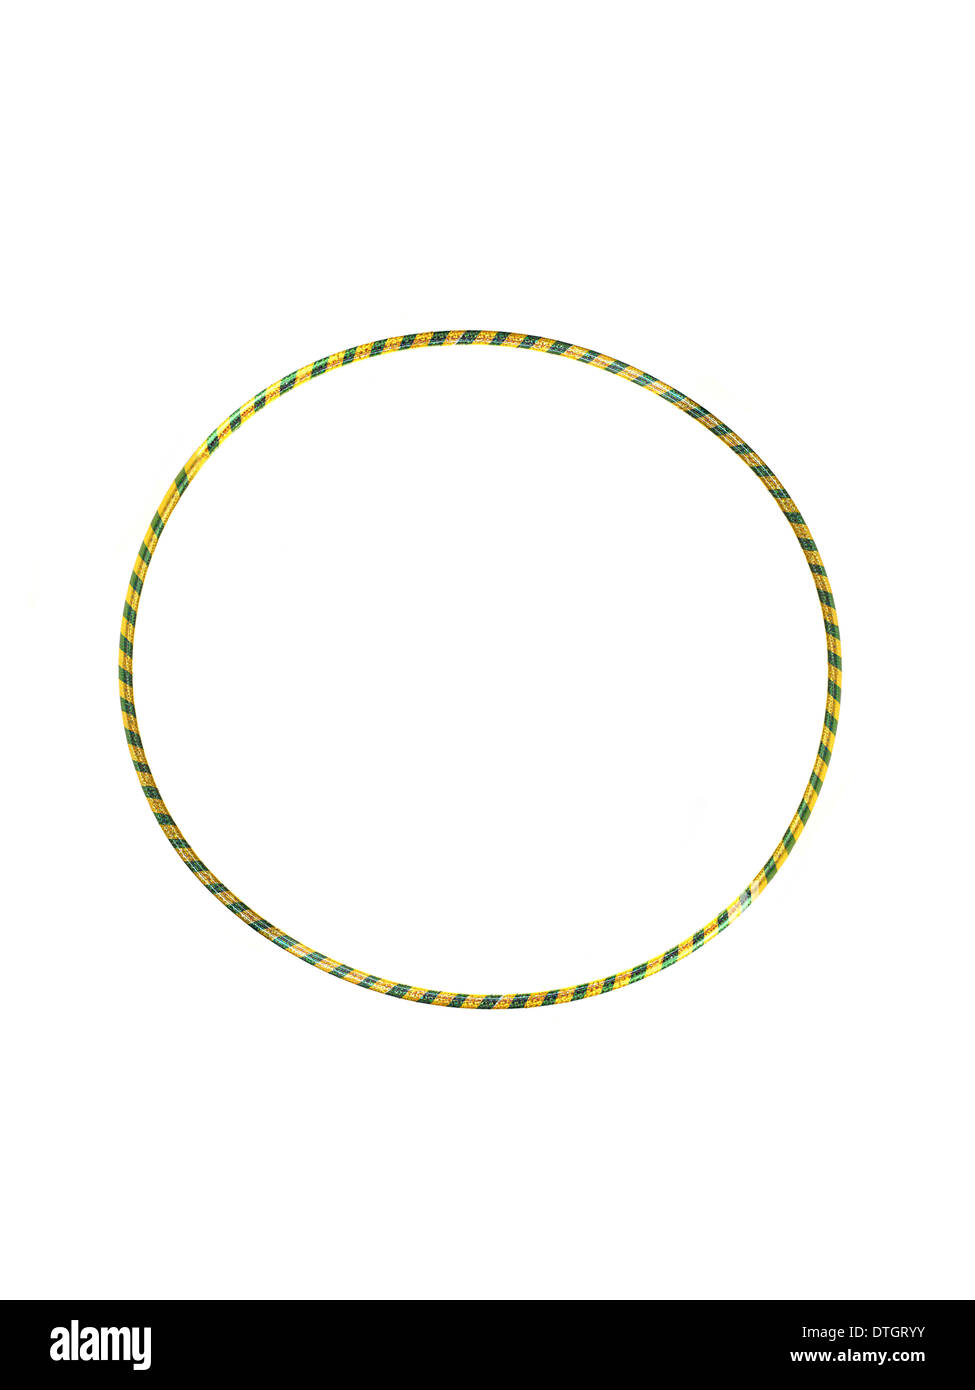 A hula hoop isolated against a white background Stock Photo